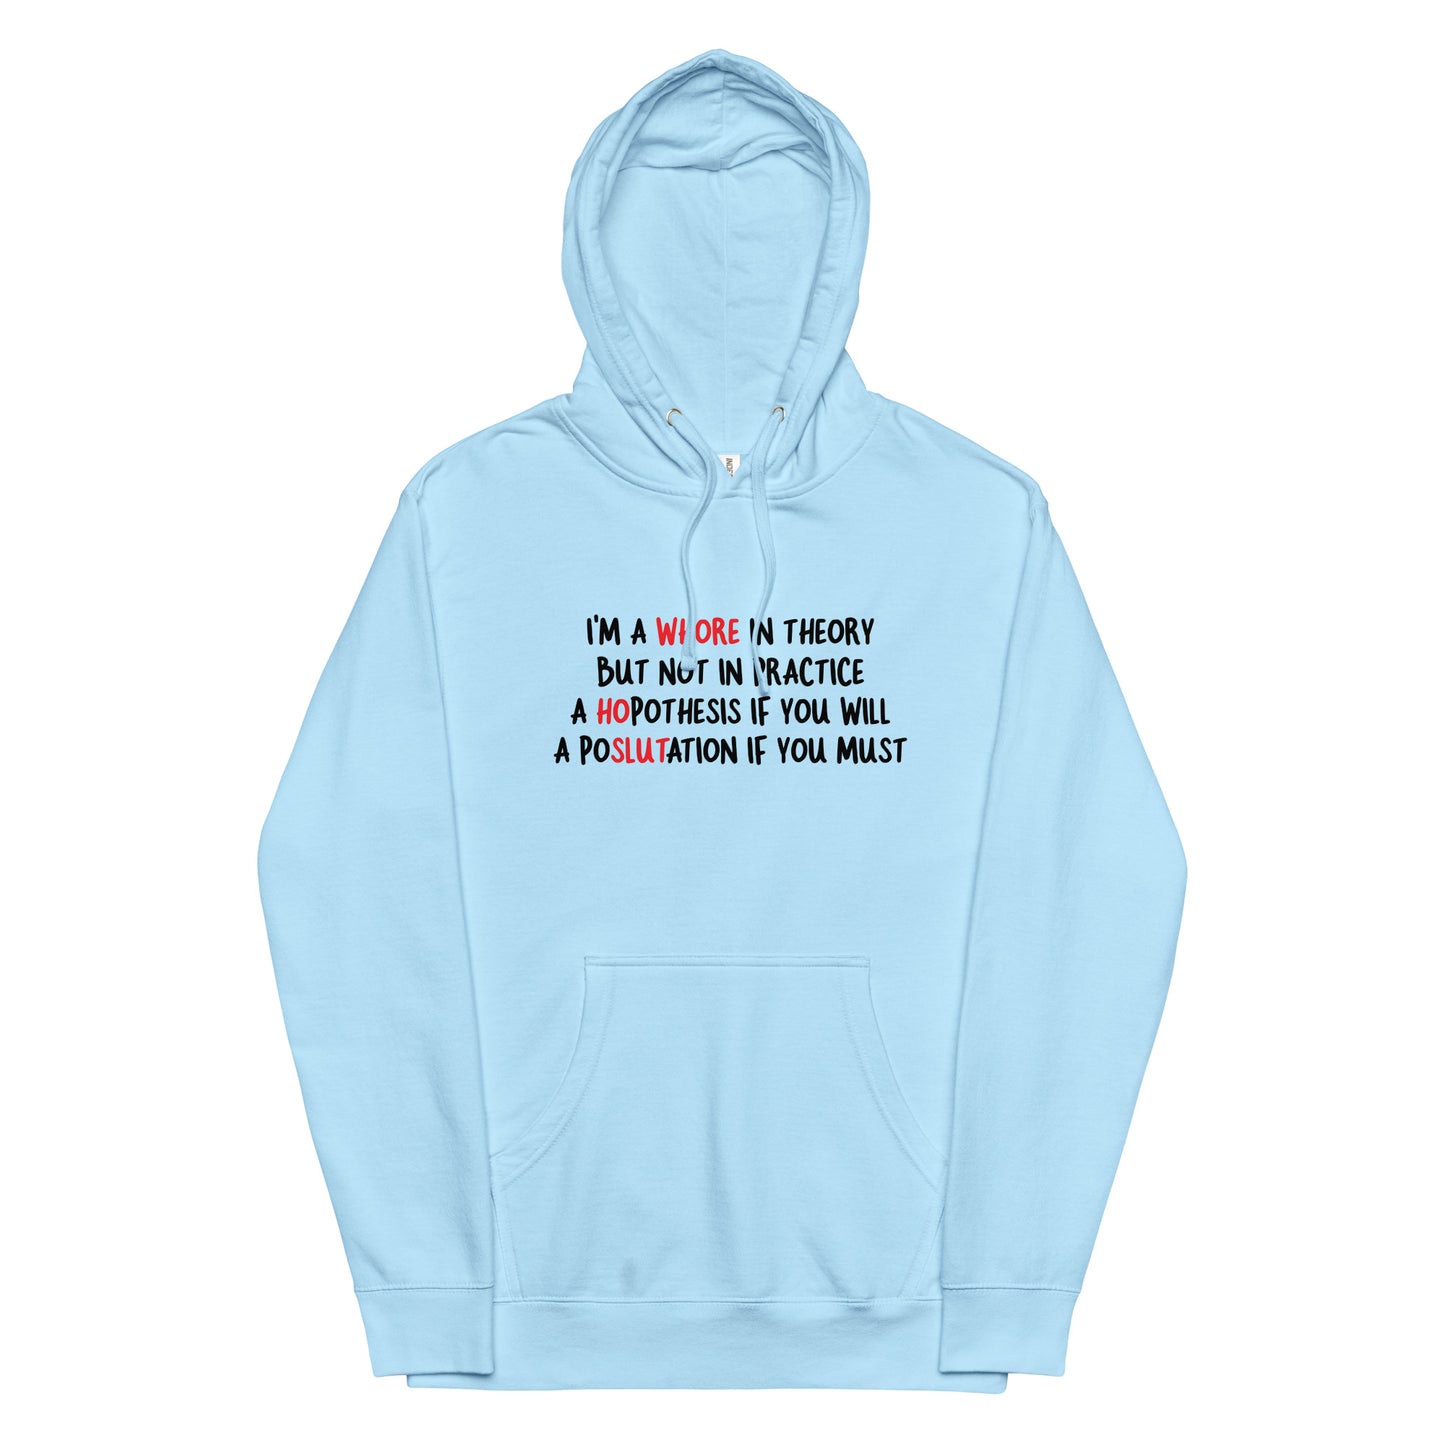 A Whore in Theory but Not in Practice Unisex hoodie